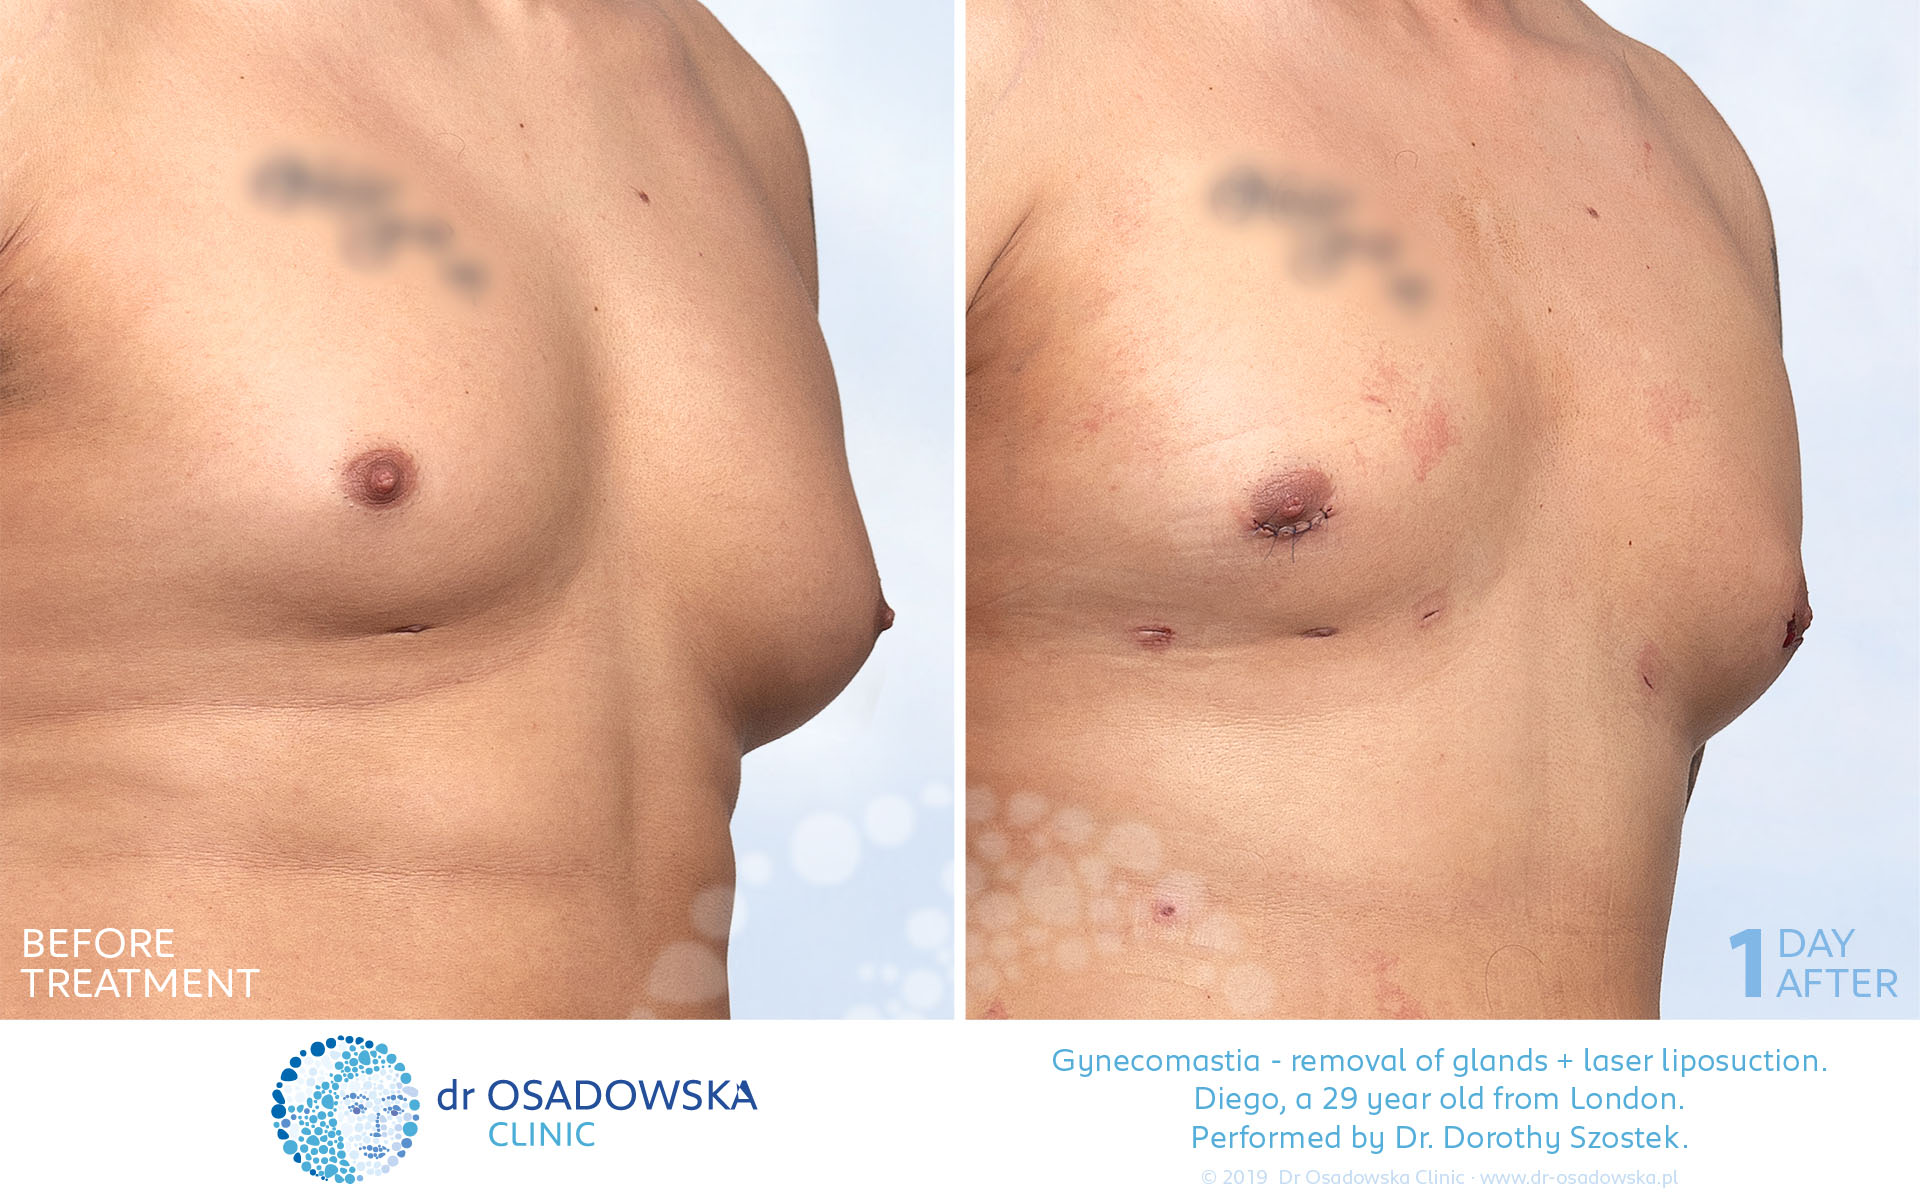 Gynecomastia of male breast and laser liposuction, LipoLife.  Pictures before and 1 day after surgery. Performed by Dr. Dorothy Szostek. Diego, London. 